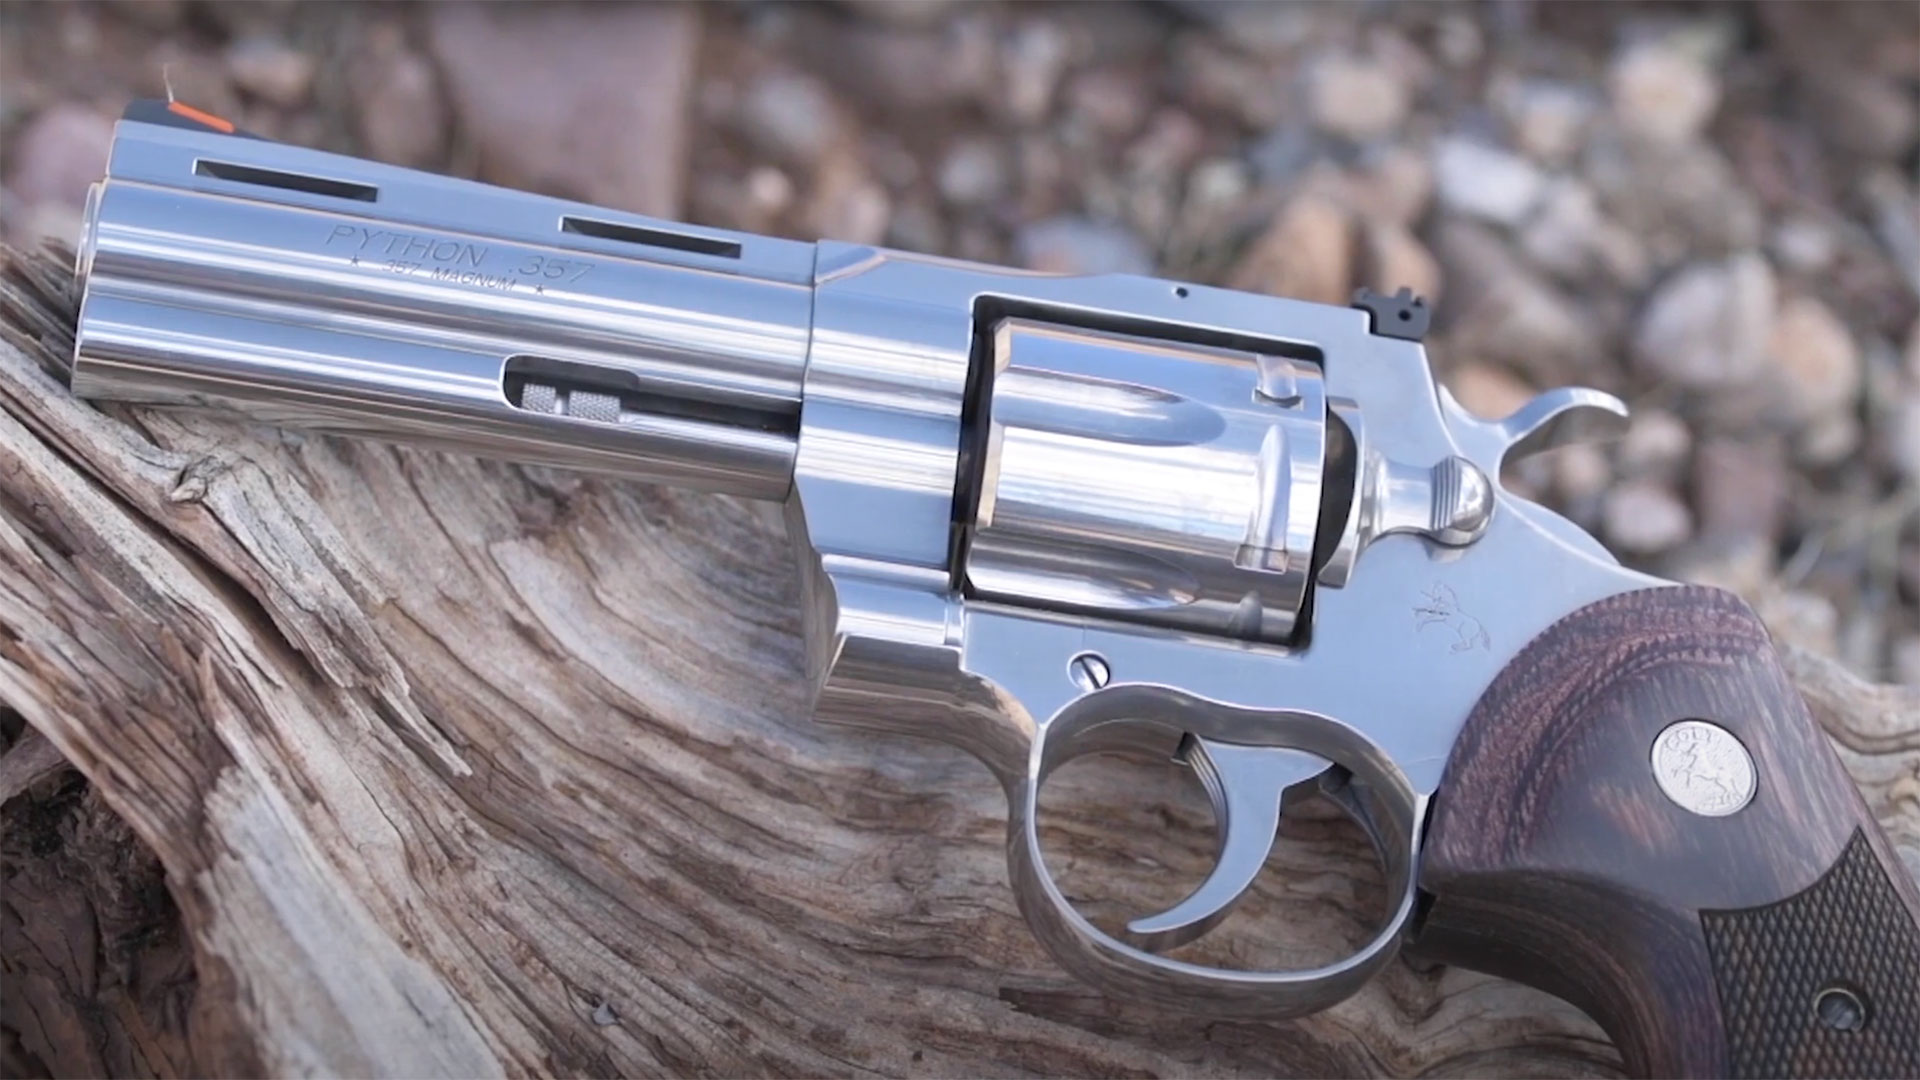 A closer look at the stainless steel barrel and frame of the new production Colt Python, as seen from the left side.